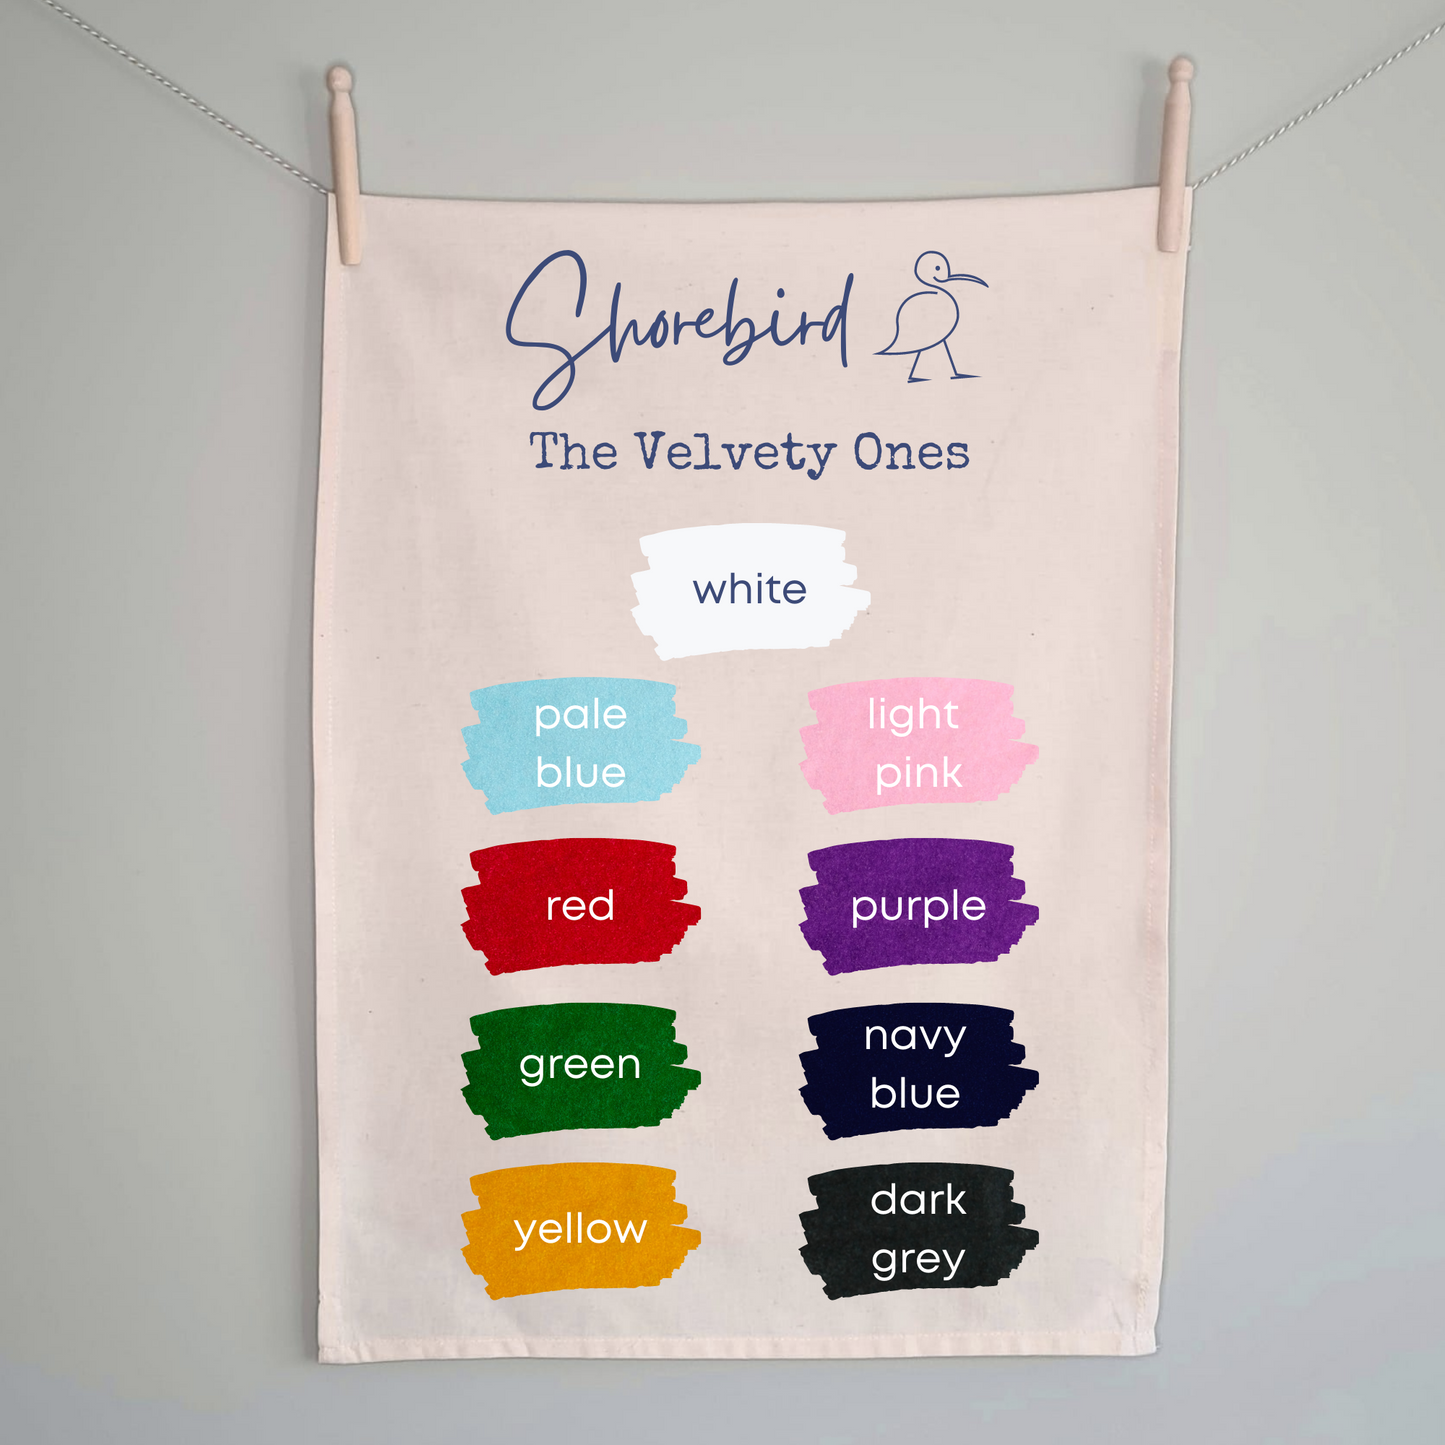 The Personalised Adults Apron - 100% Organic Cotton